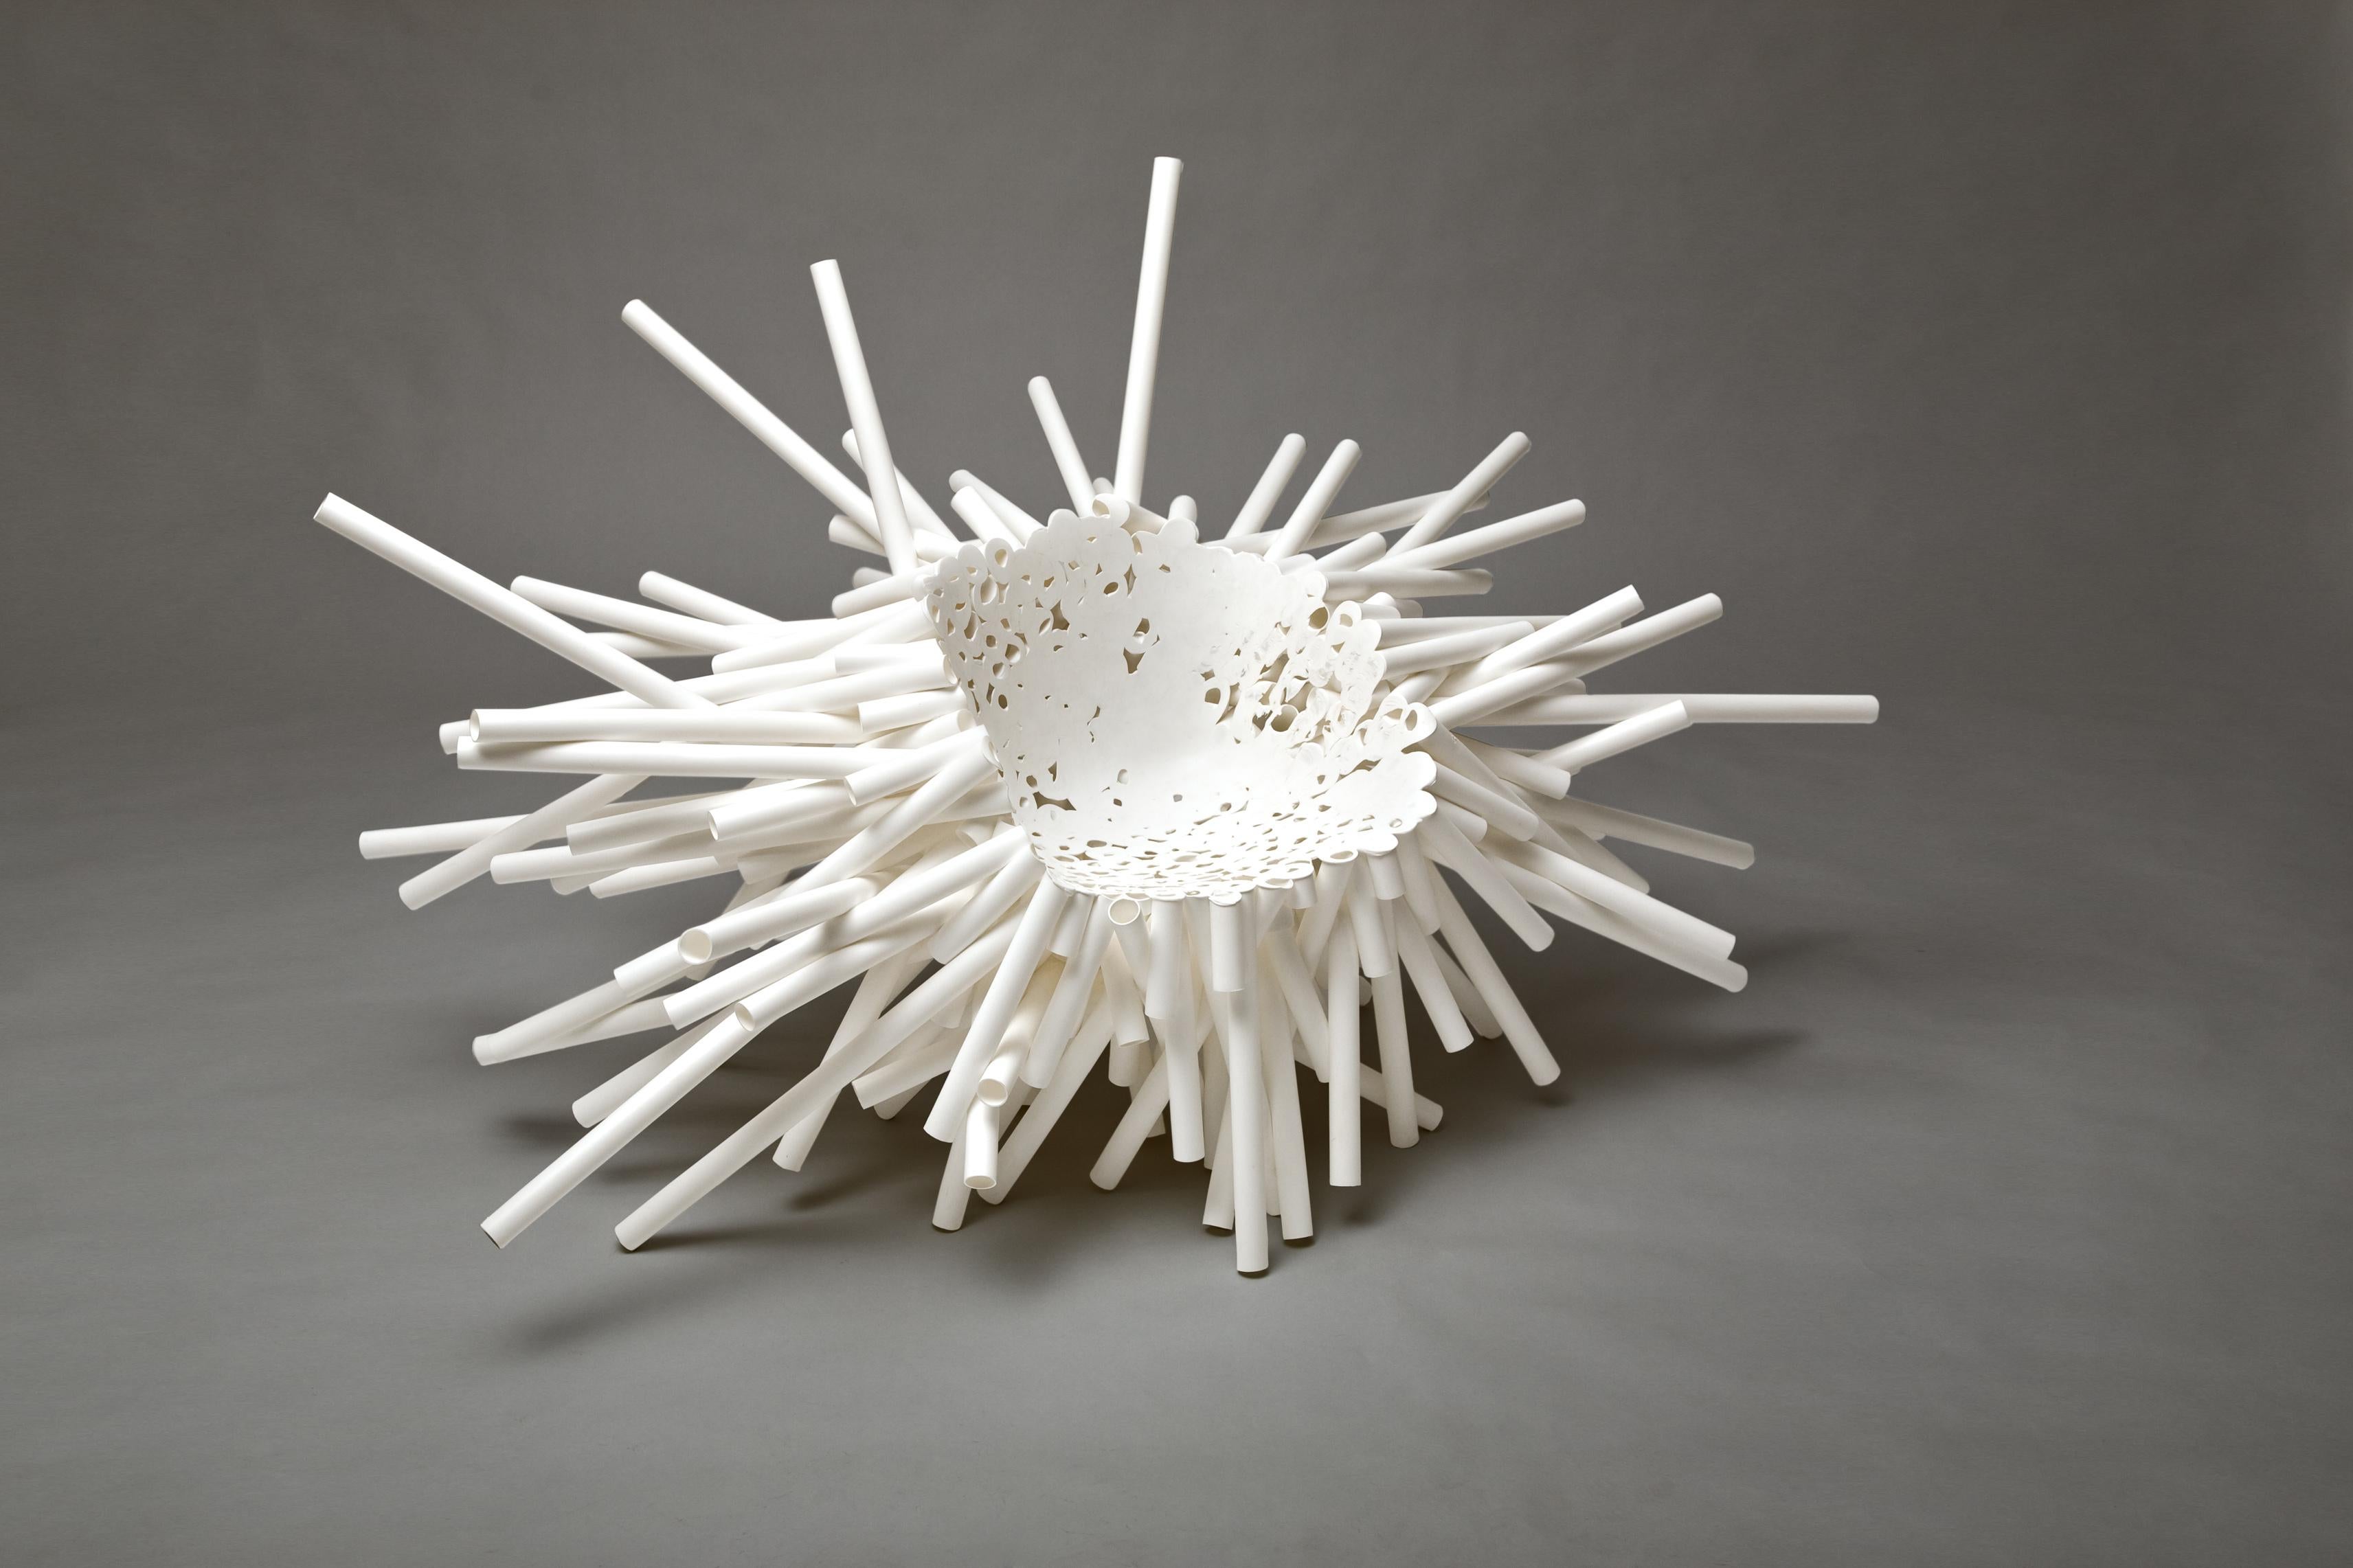 Hand-Crafted Meltdown Chair, PP Tube #1 White by Tom Price, Contemporary, Limited Edition For Sale